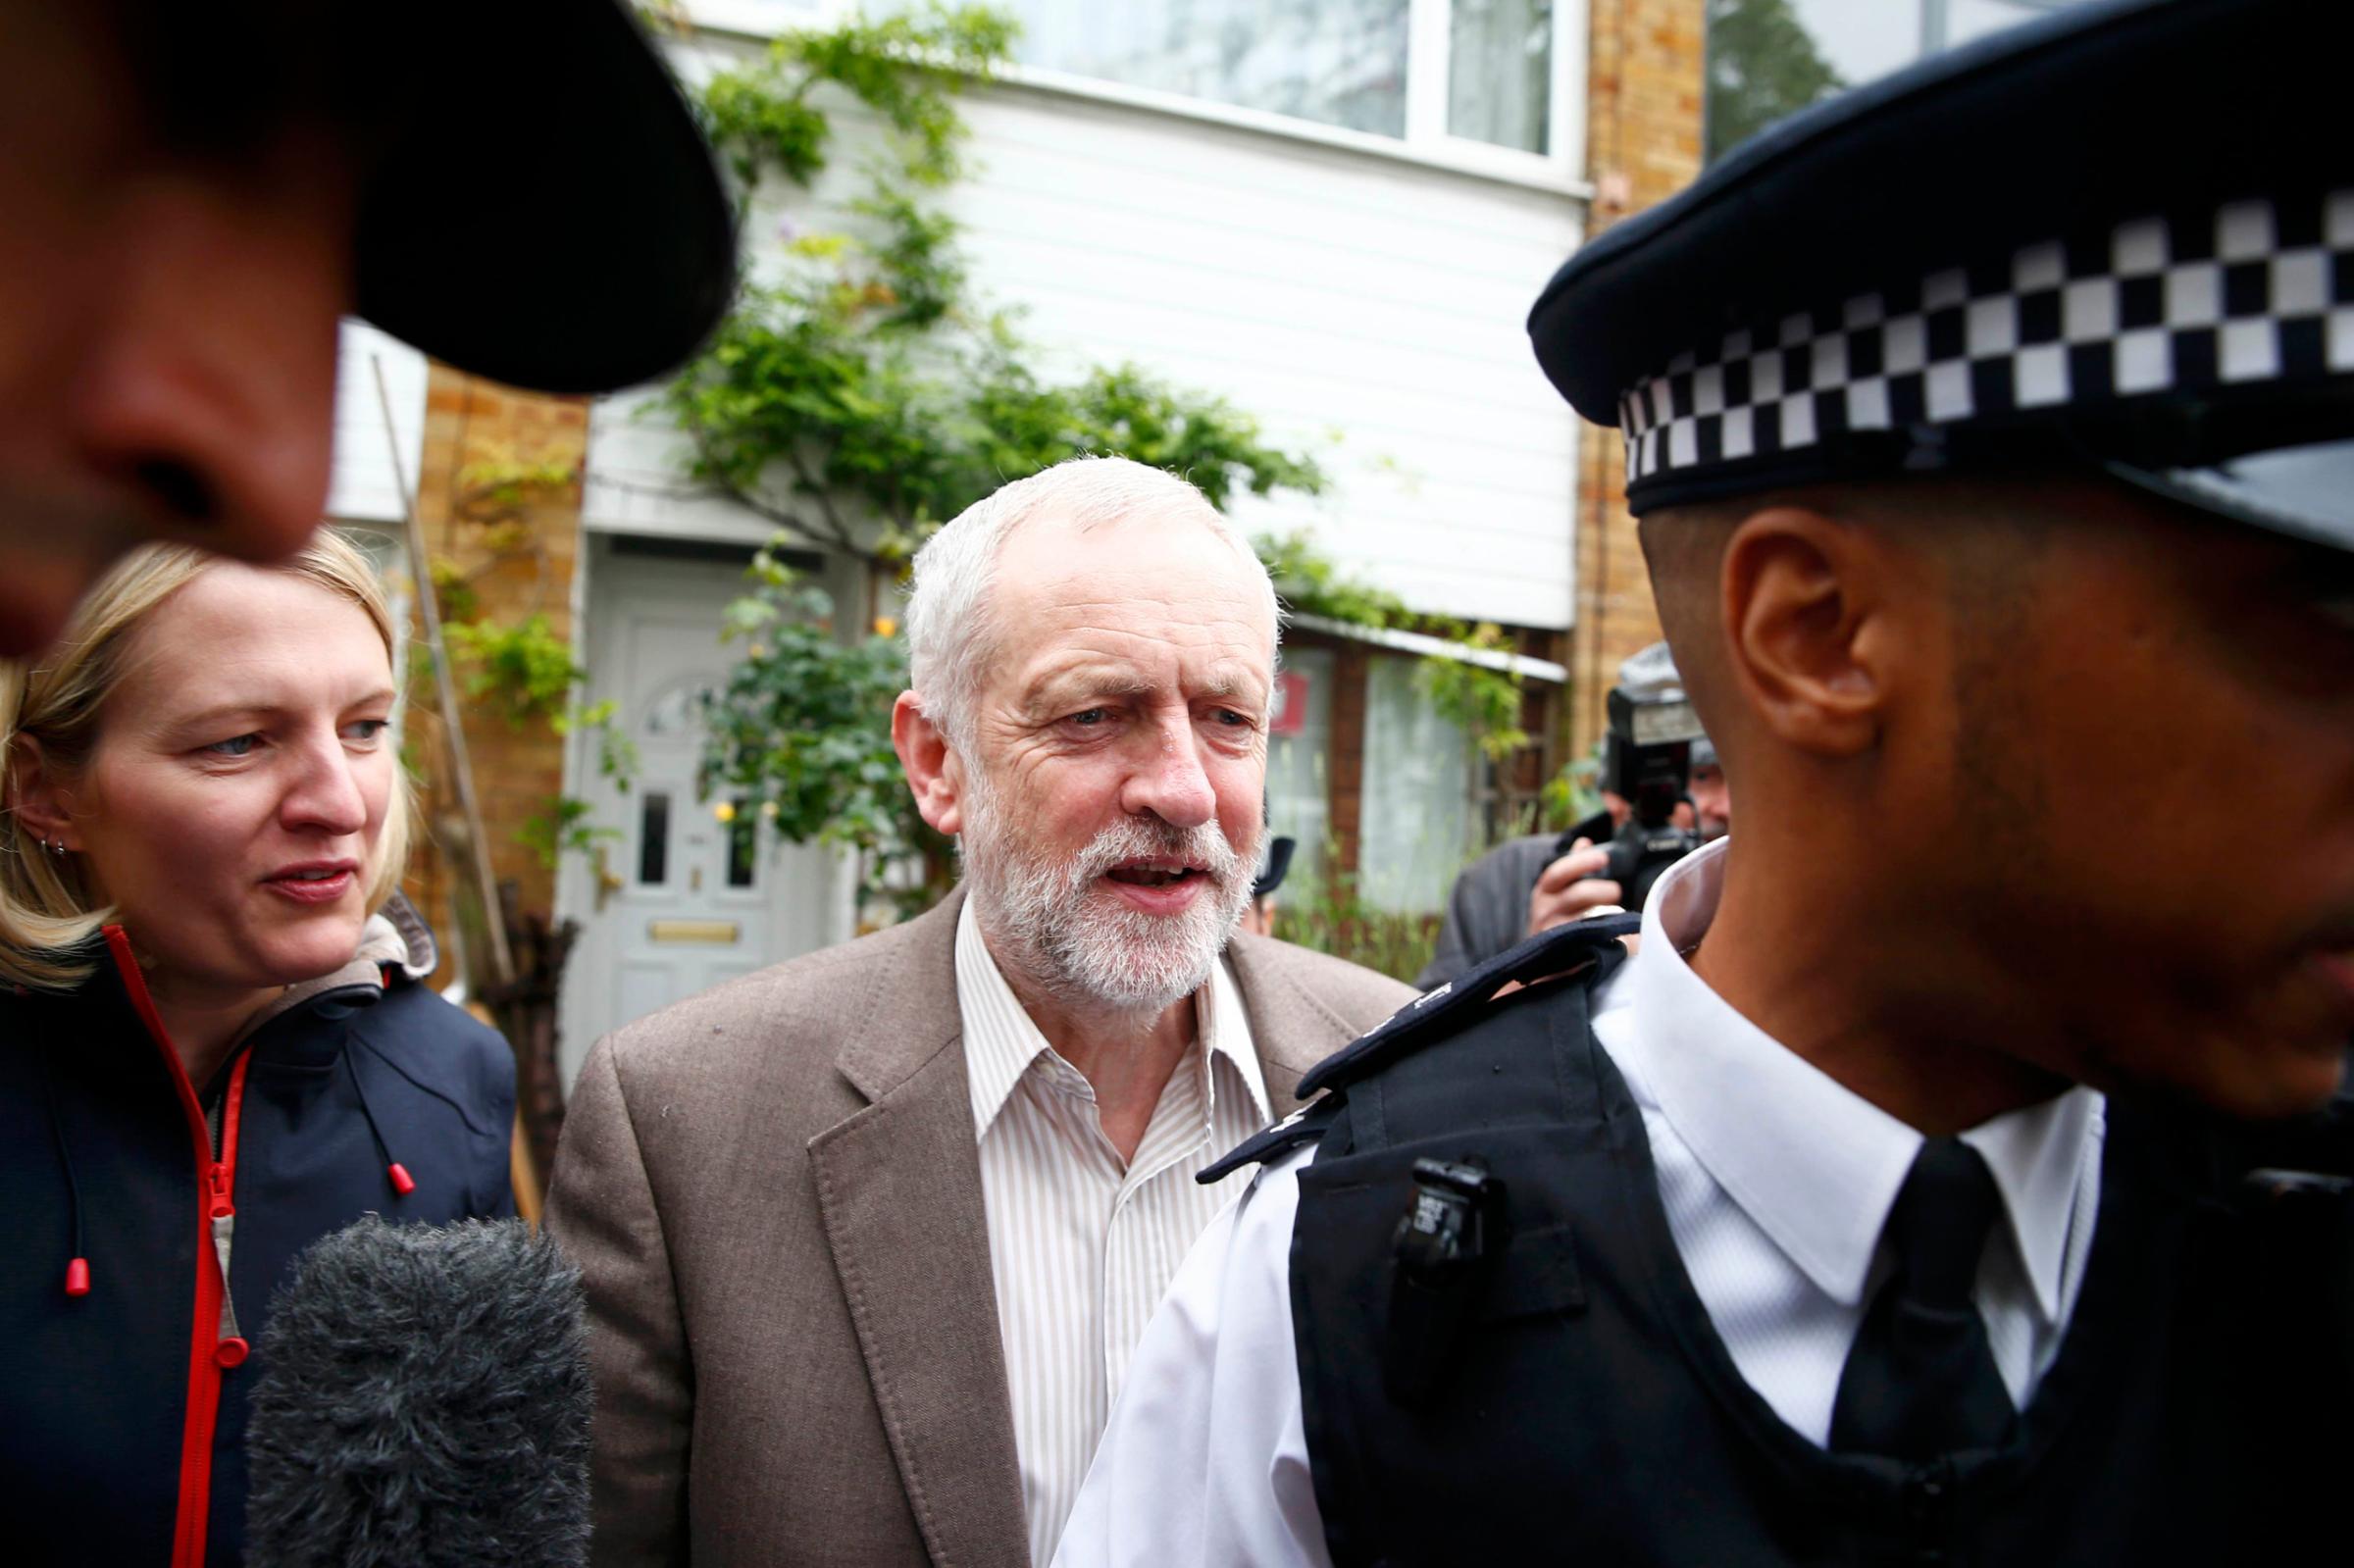 The leader of Britain's opposition Labour party, Jeremy Corbyn, leaves his home in London on June 27, 2016.